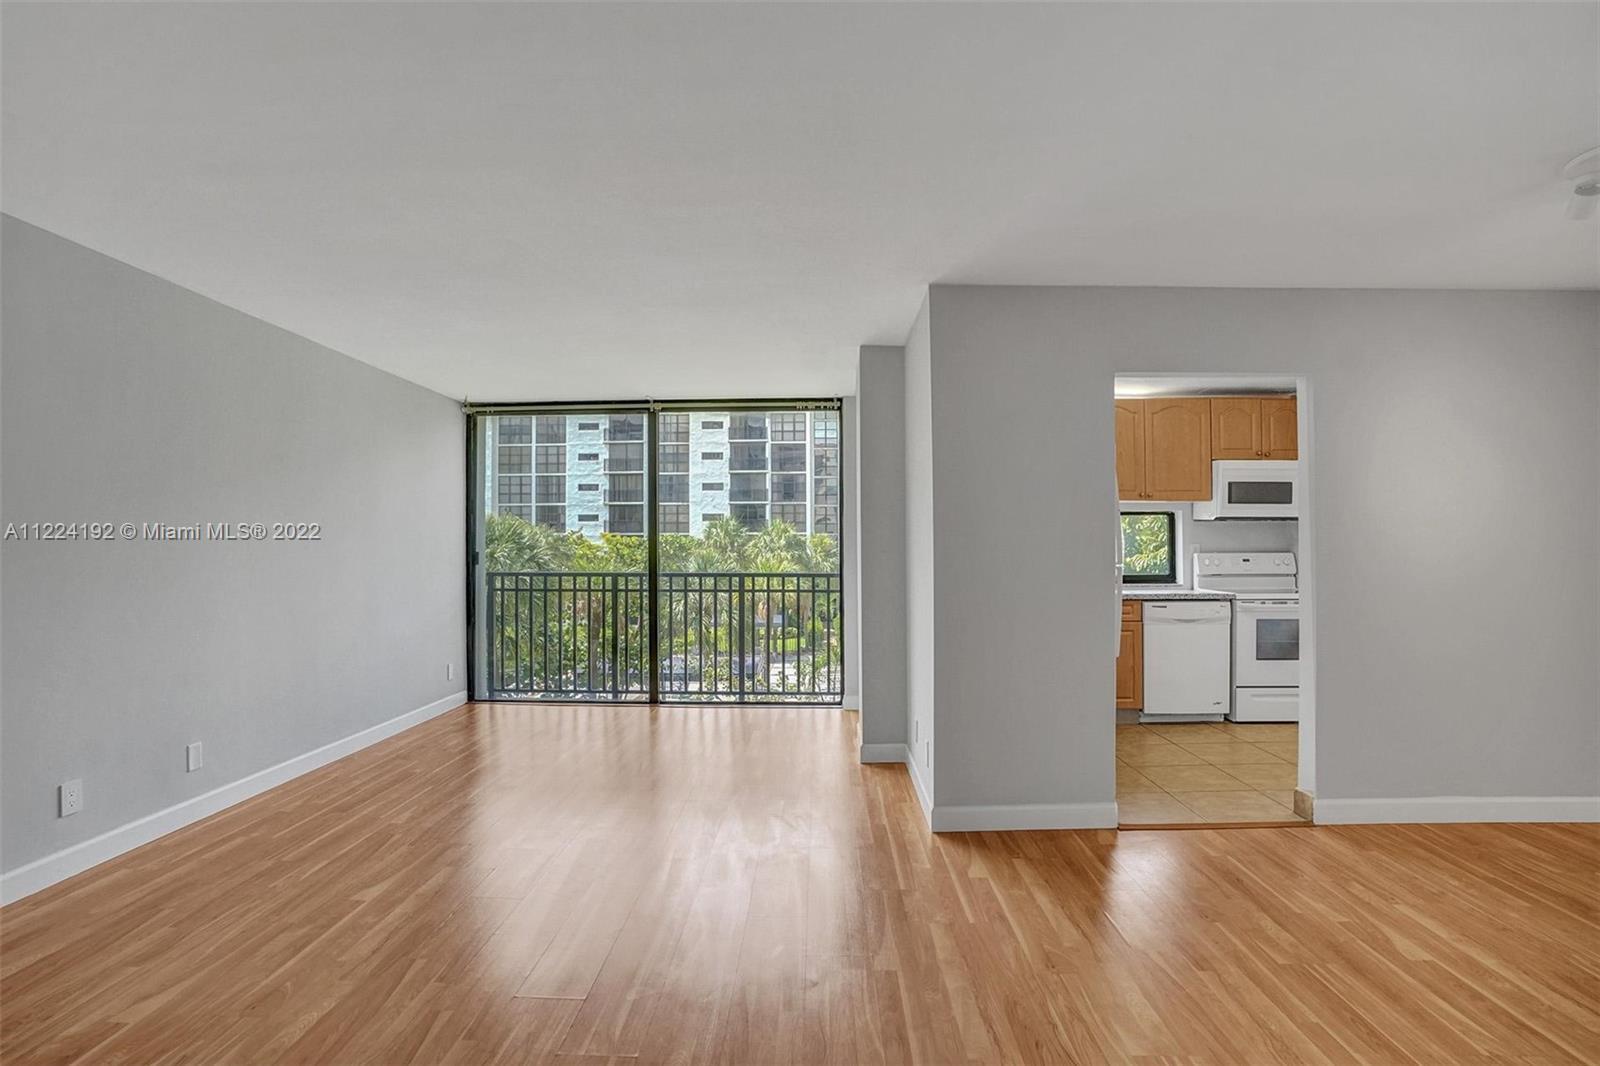 Beautiful and spacious 1Bed, 1.5 Bath condo in gated community in Sunny Isles Beach. Freshly painted